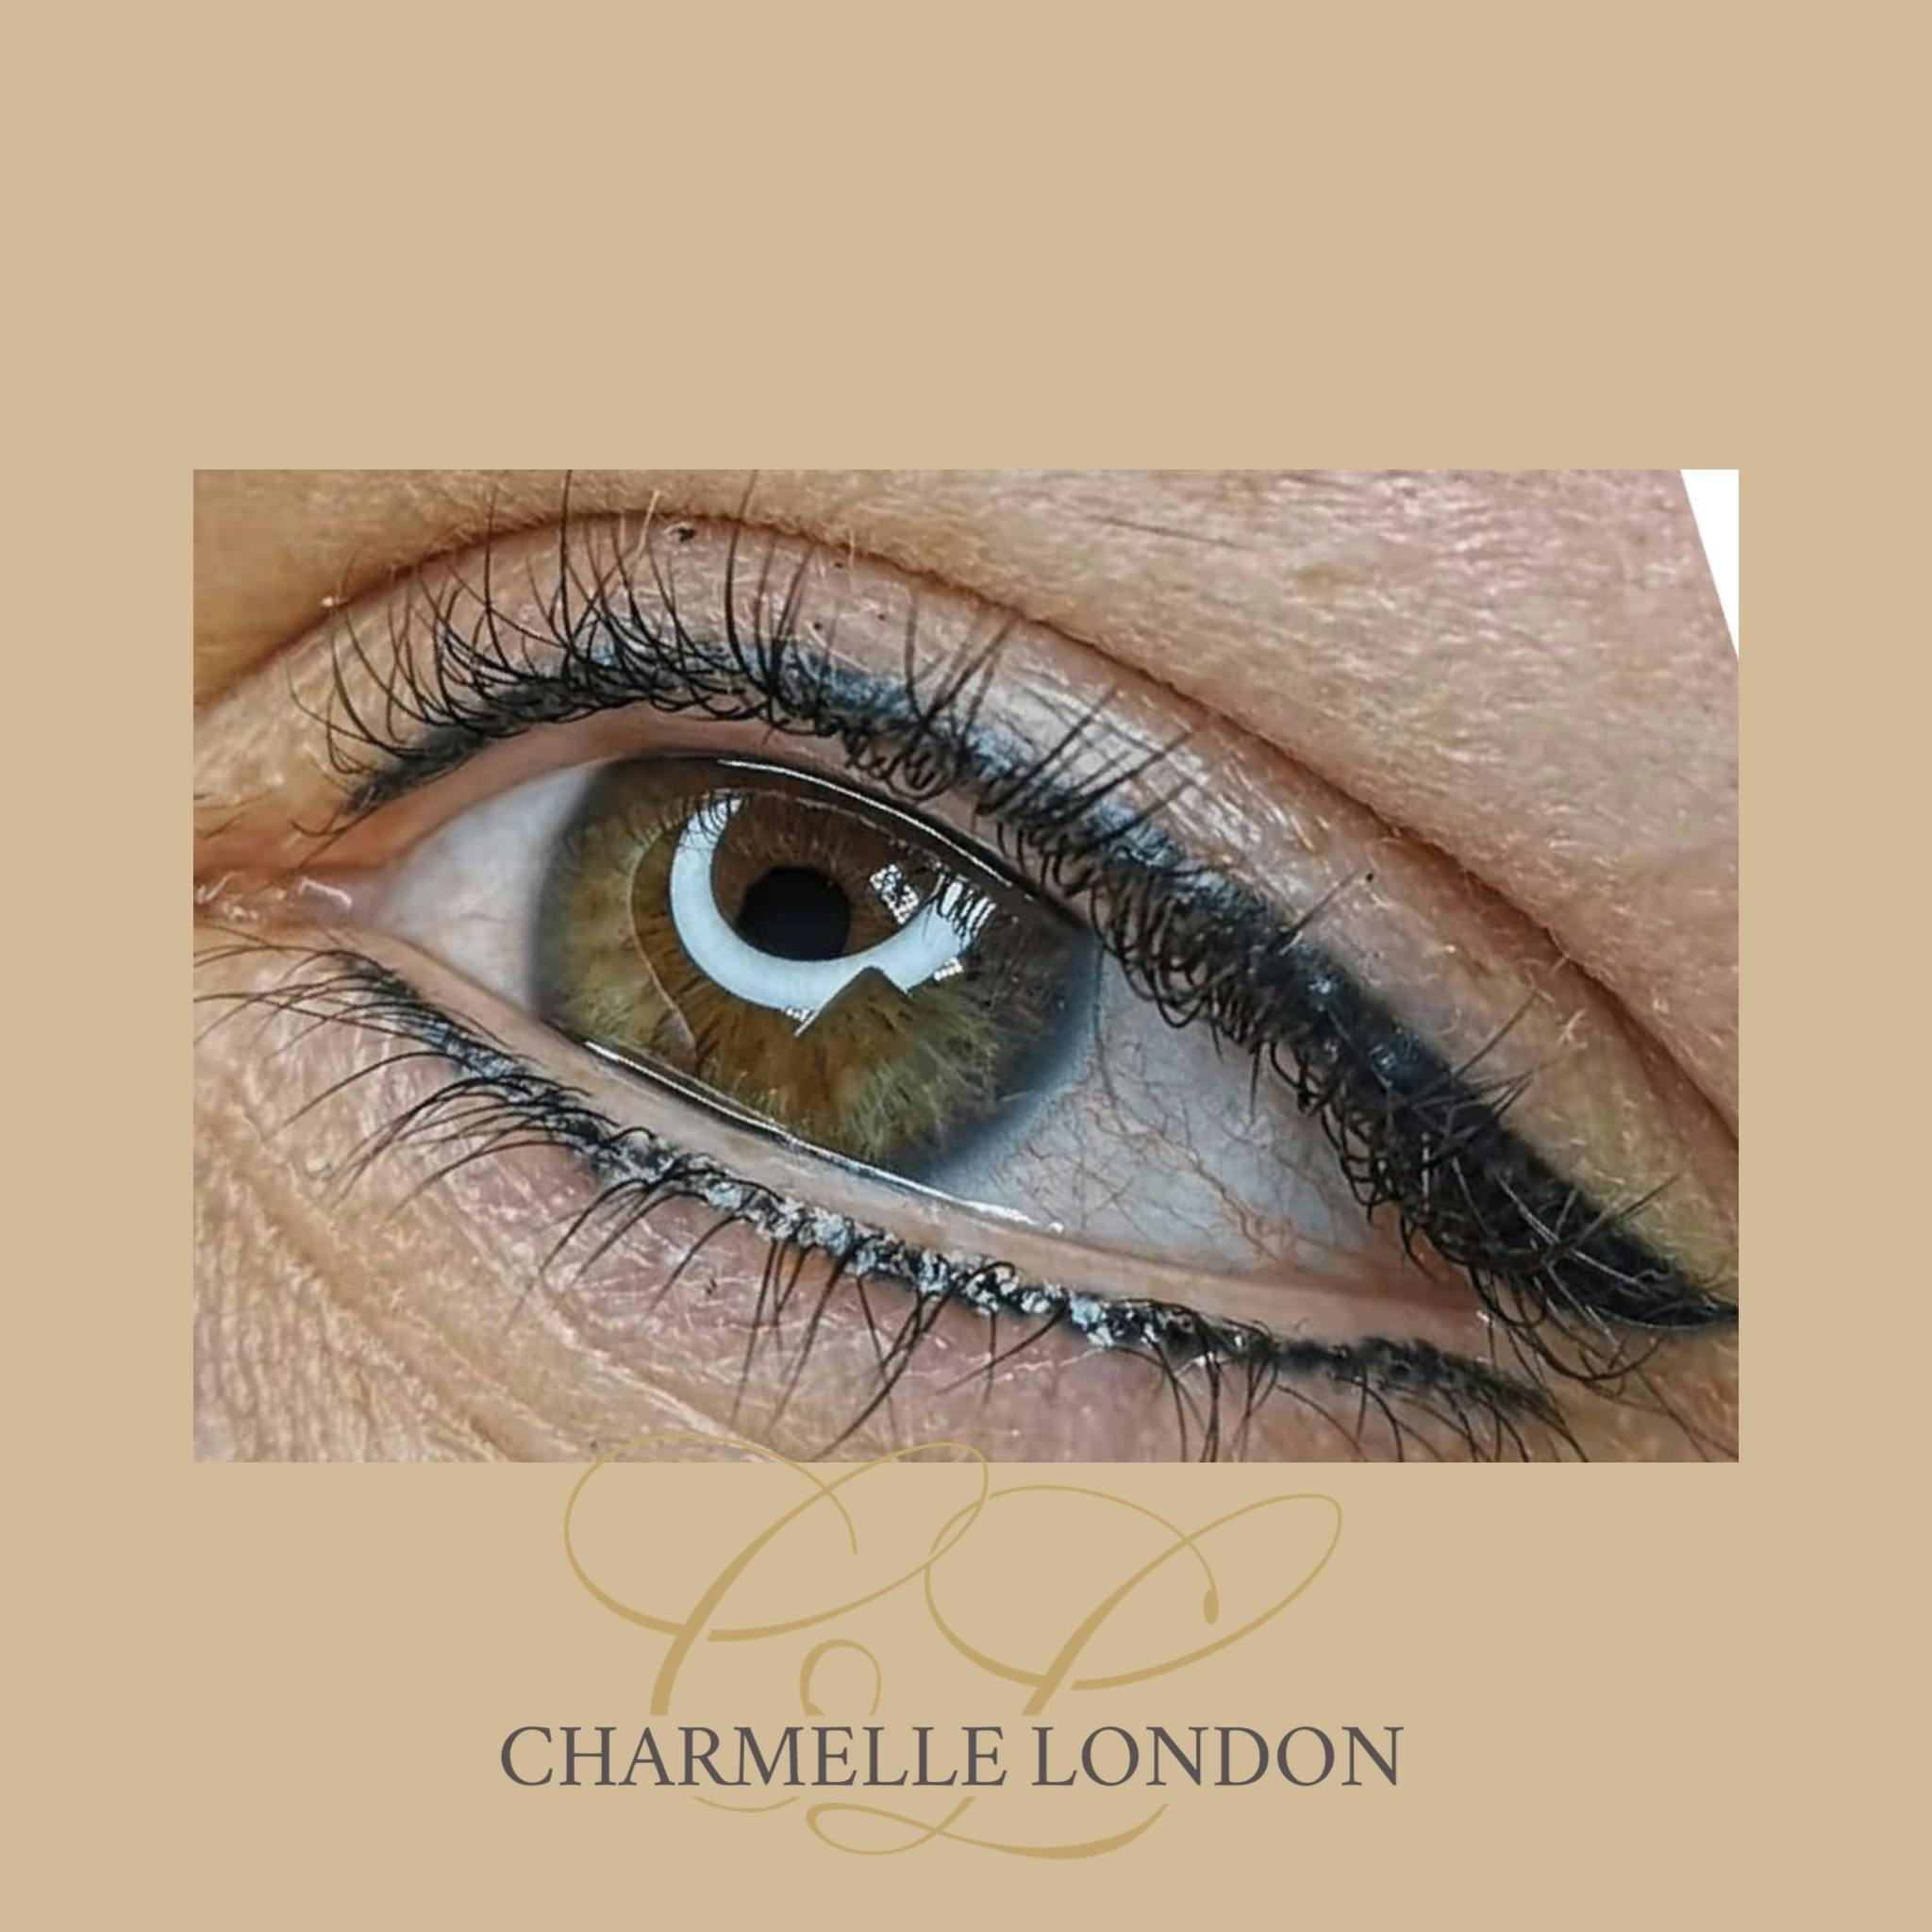 Are you looking for a way to enhance your natural beauty with permanent makeup? At Charmelle London, we offer a wide range of permanent makeup services, including eyebrows, eyes, and lips. Our team of experienced artists will work with you to create a look that is unique to your features and your lifestyle.

Whether you are looking for something soft and natural or a more dramatic look, we can help you achieve your desired results. We use the highest quality products and techniques available, so you can be sure that your permanent makeup will look beautiful and last for years to come.

All of our permanent makeup treatments include a complimentary consultation with one of our artists to discuss your goals and expectations. We will also provide you with aftercare instructions to ensure that your new look lasts as long as possible as well as including a complimentary touch up appointment session.